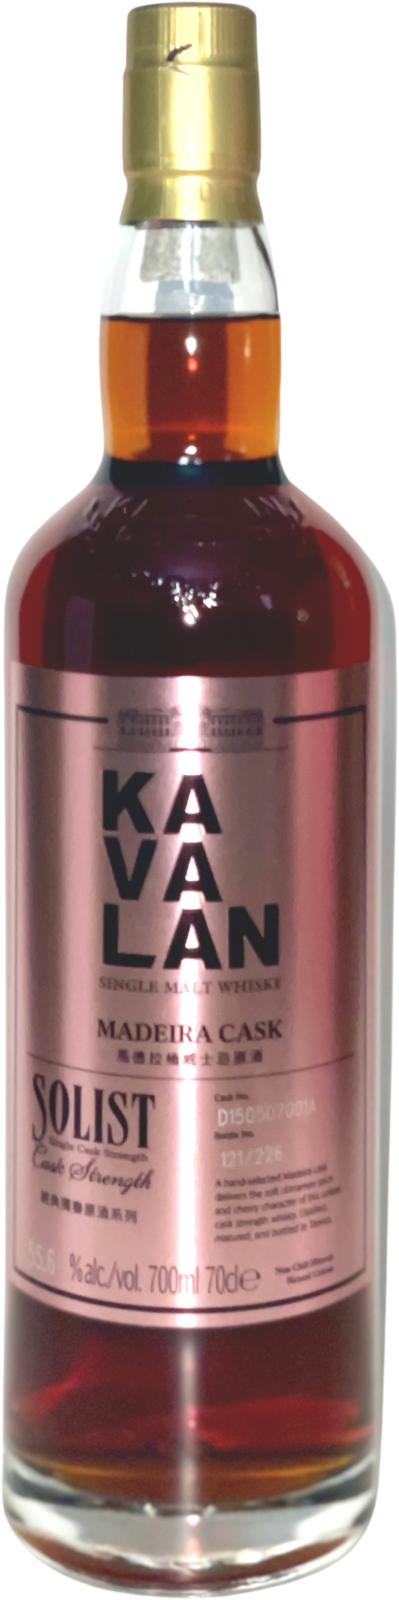 Kavalan Solist Madeira D150507061A Get Lost in the Whisky 55.6% 700ml